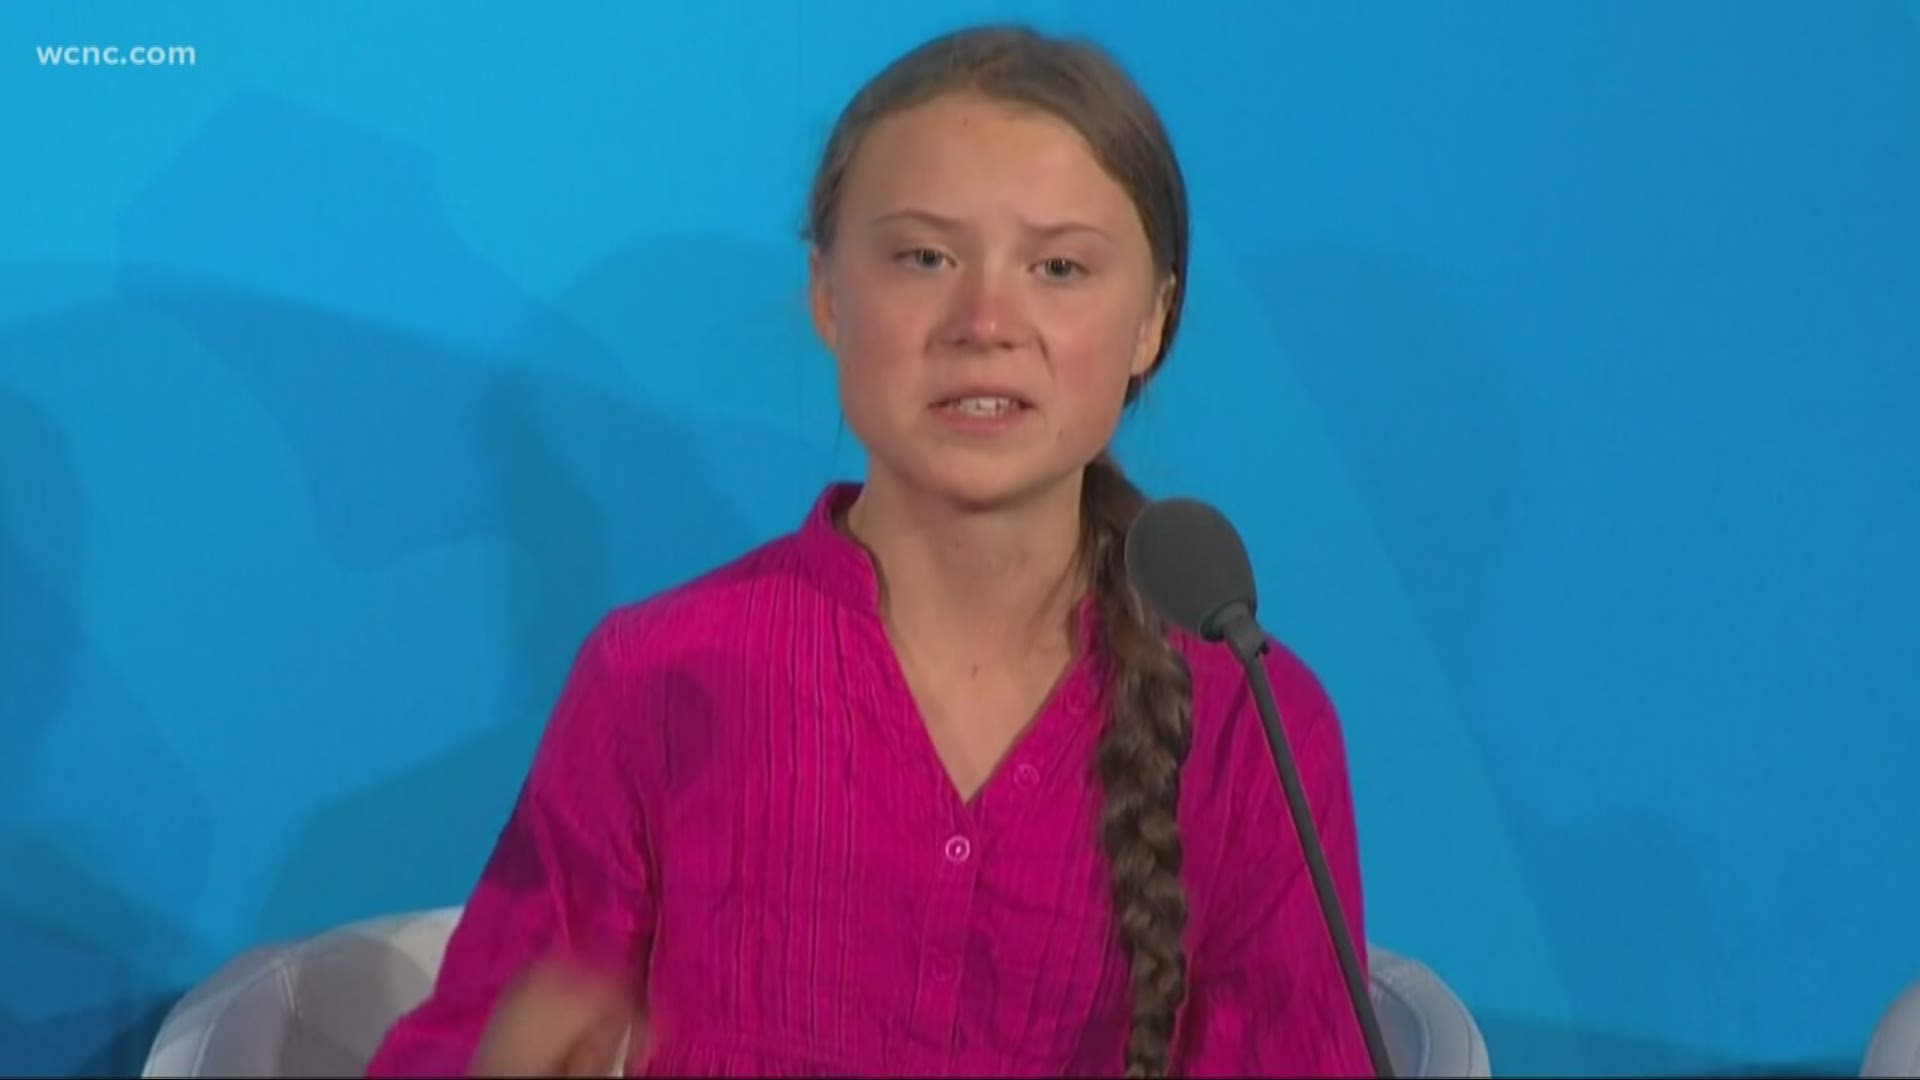 Climate activist Greta Thunberg announced on social media she will join a climate strike in Charlotte Friday.